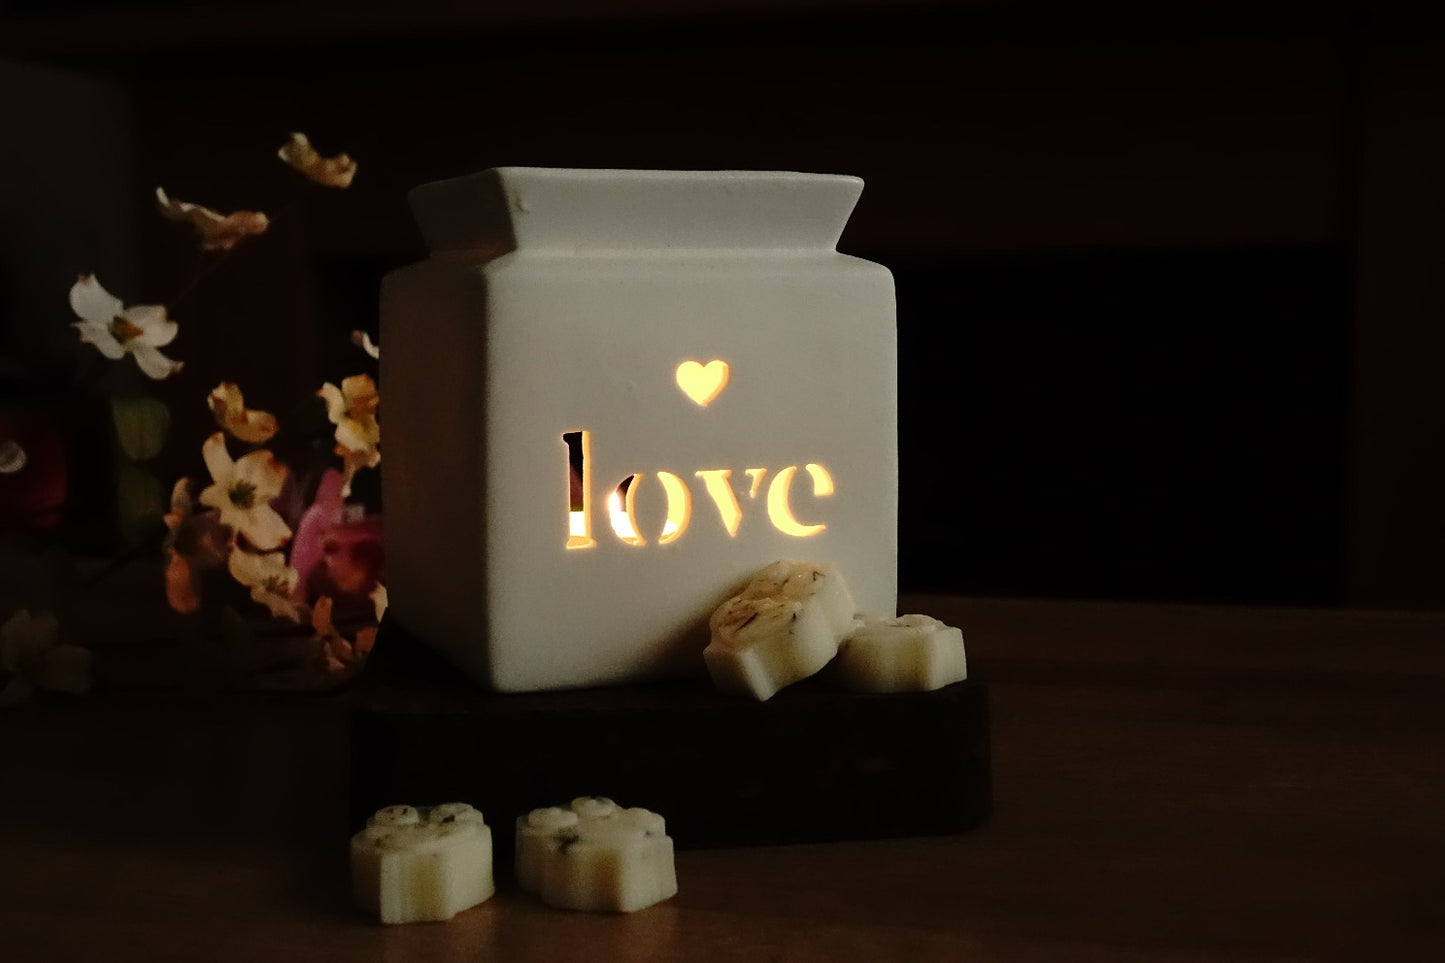 Wite Love Cut Out oil/wax Burner Ric n'Gus Candles